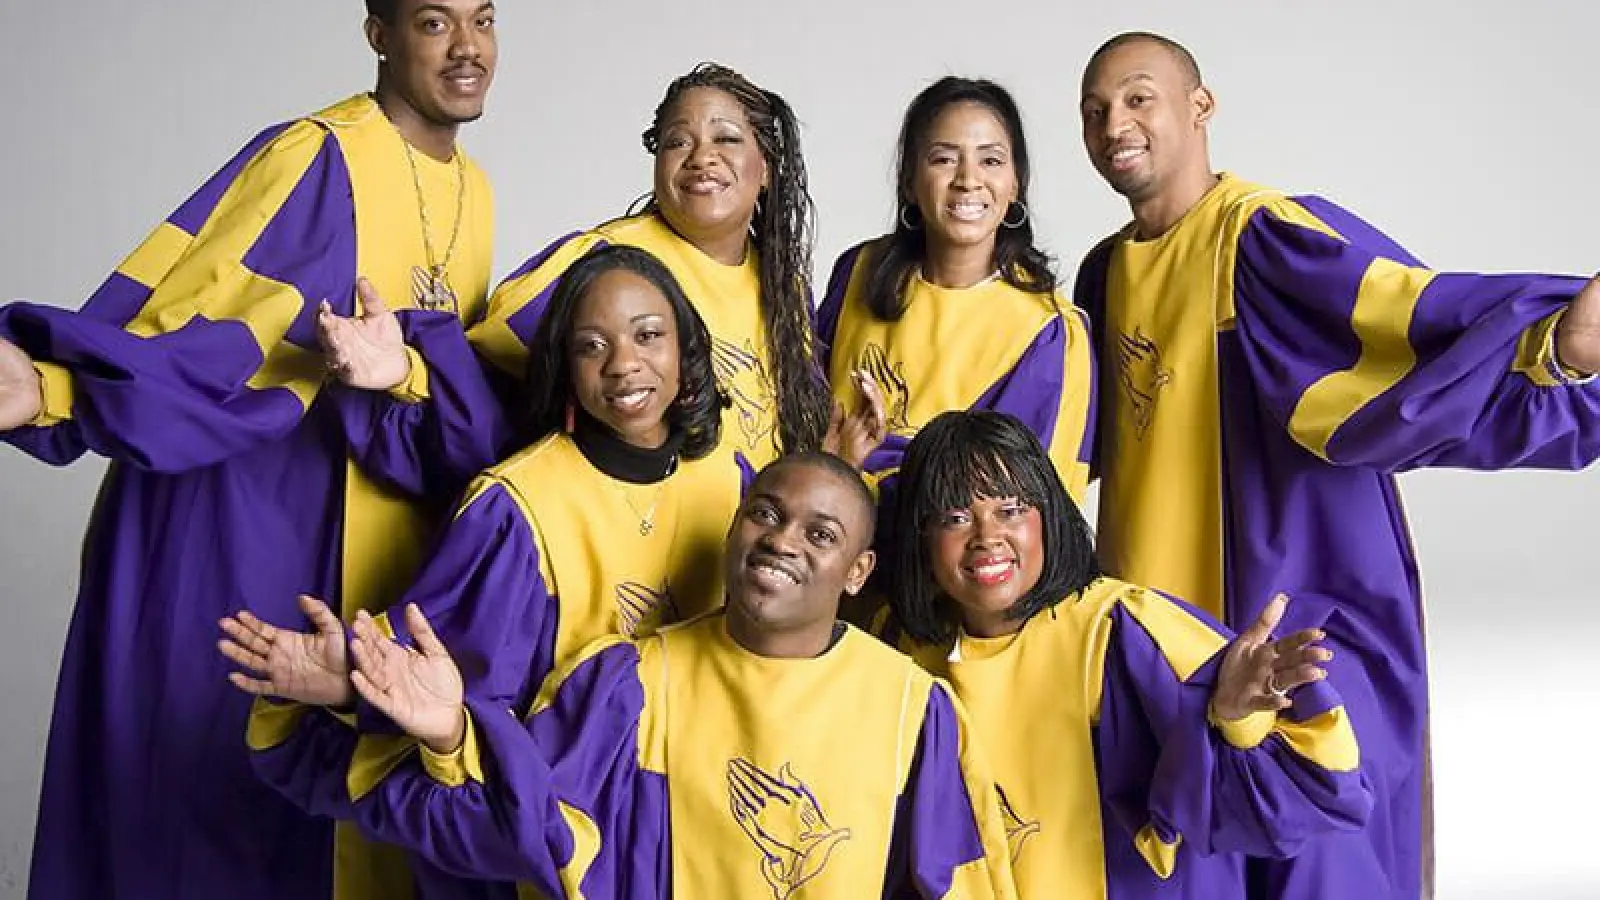 One of the finest Gospel shows… (Foto: red)